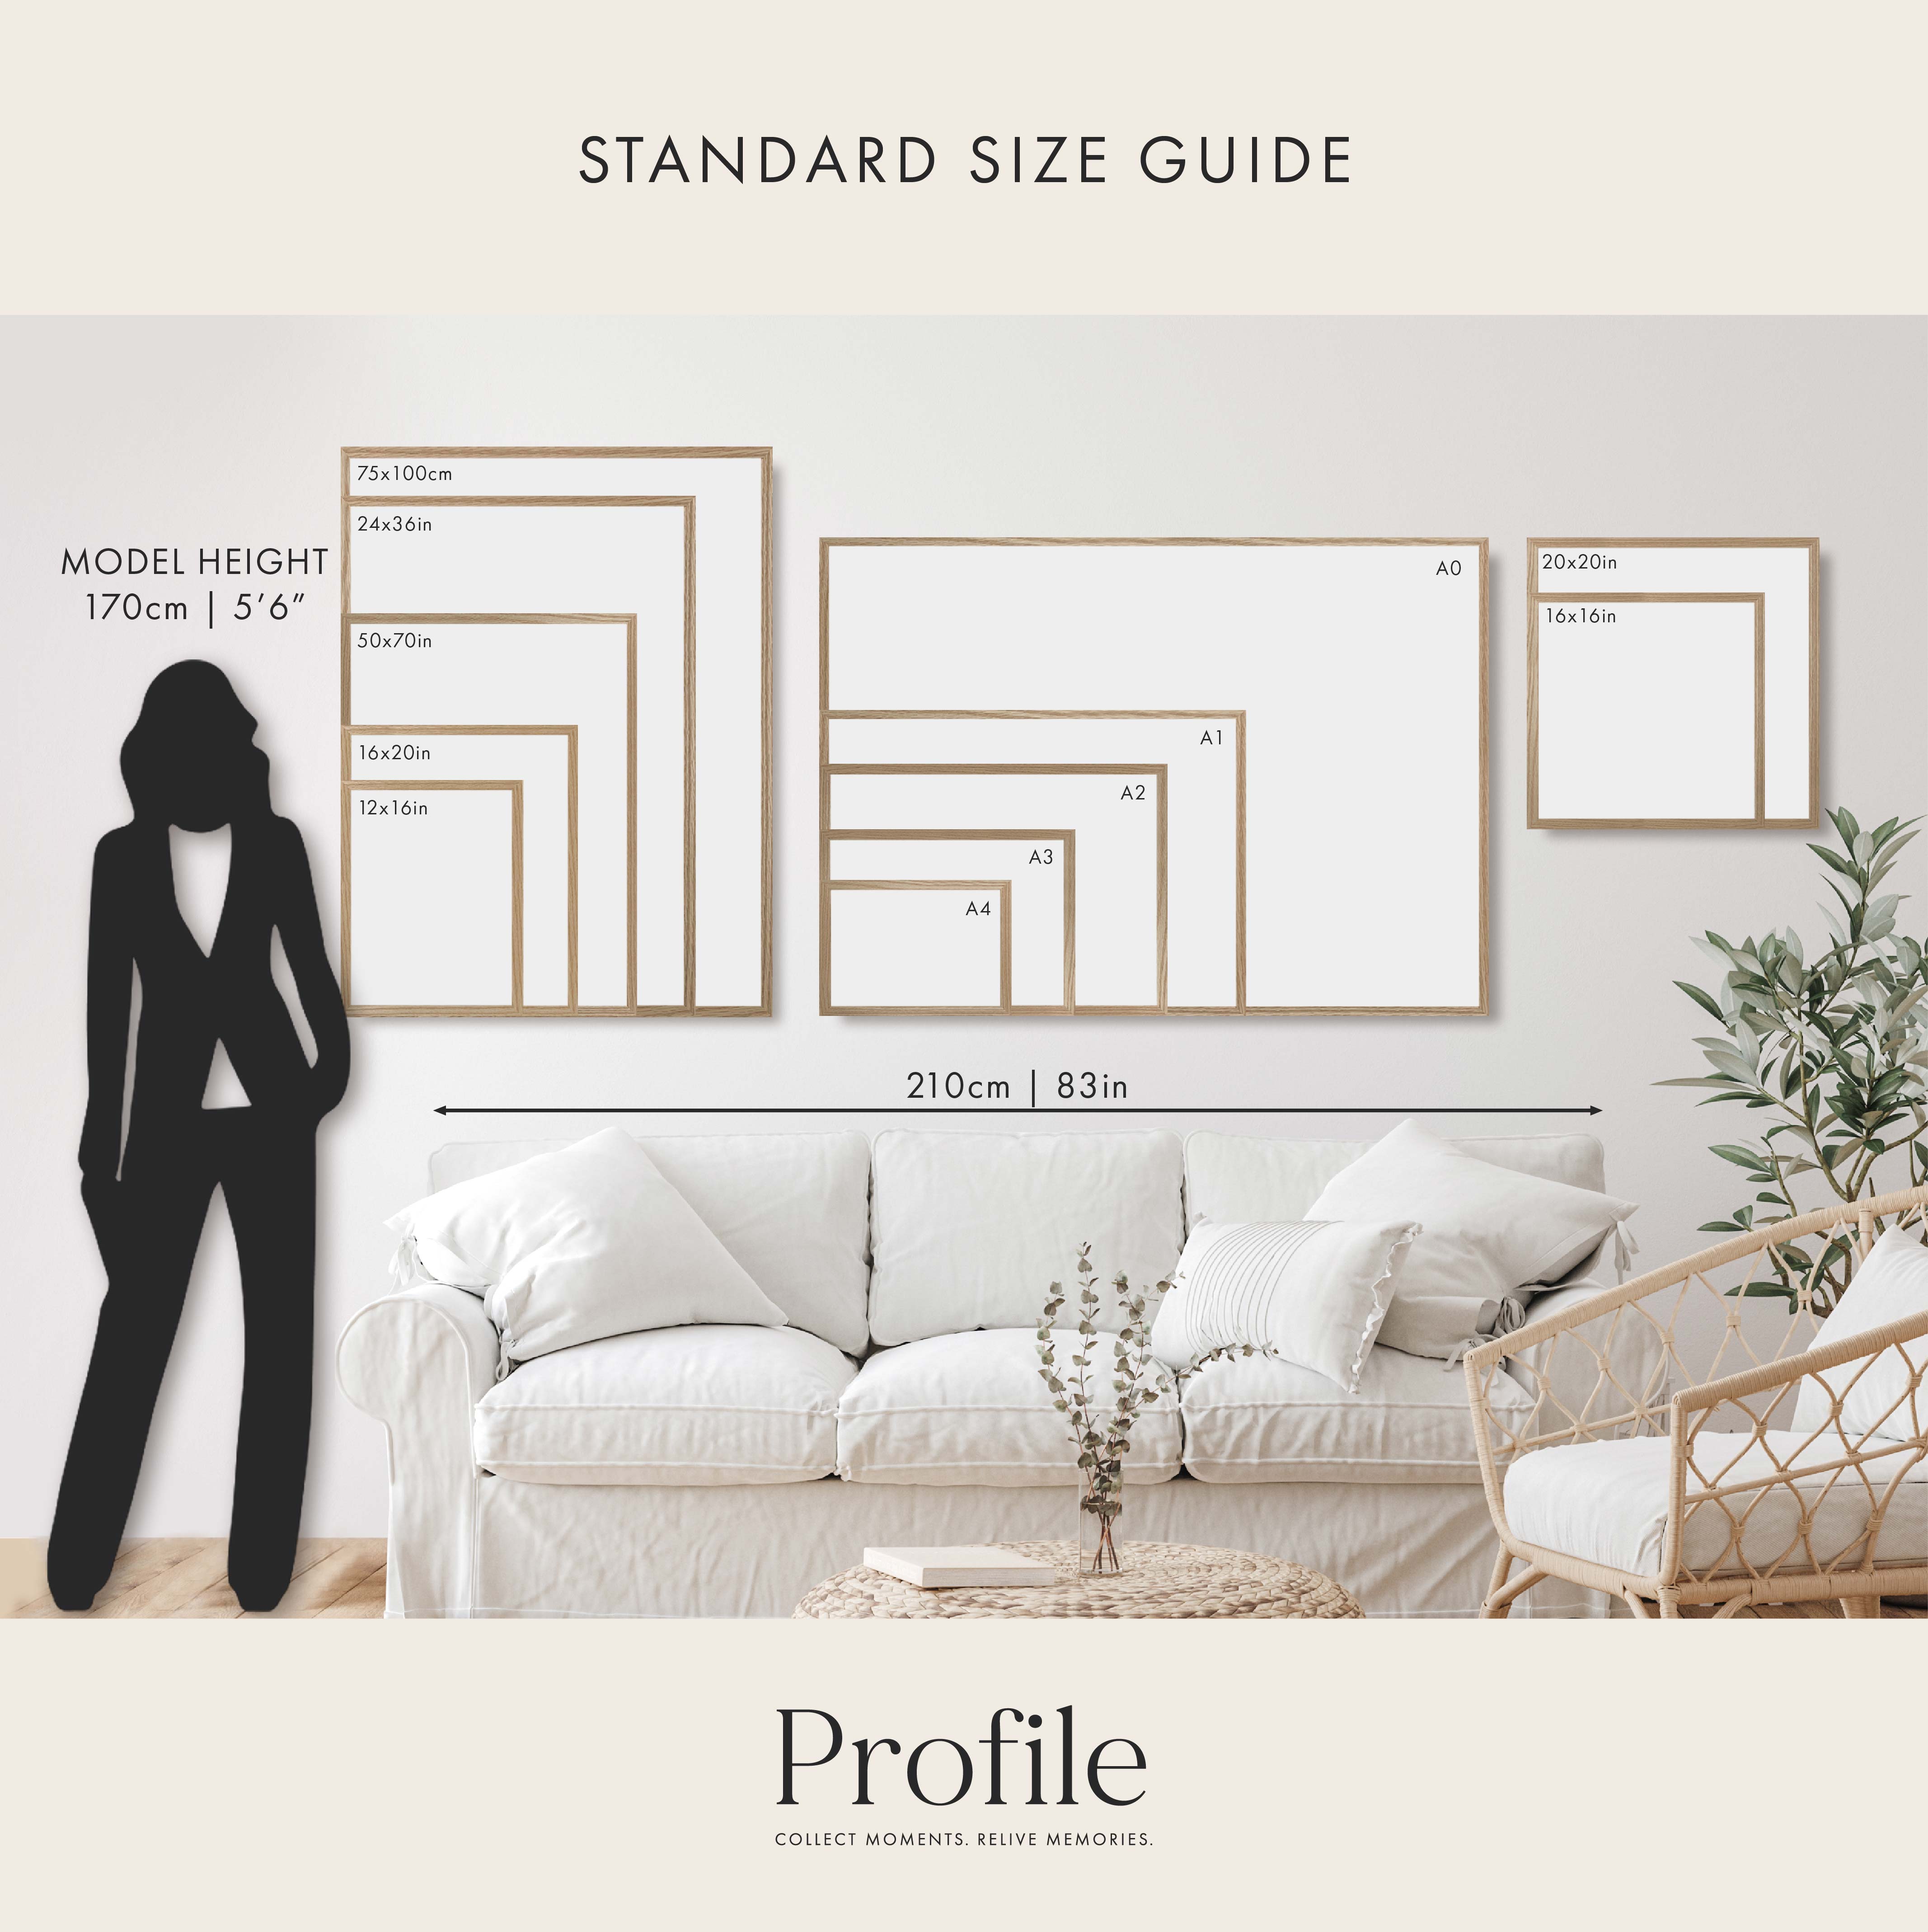 Picture Frame Sizes: A Guide to Choosing The Right Frame